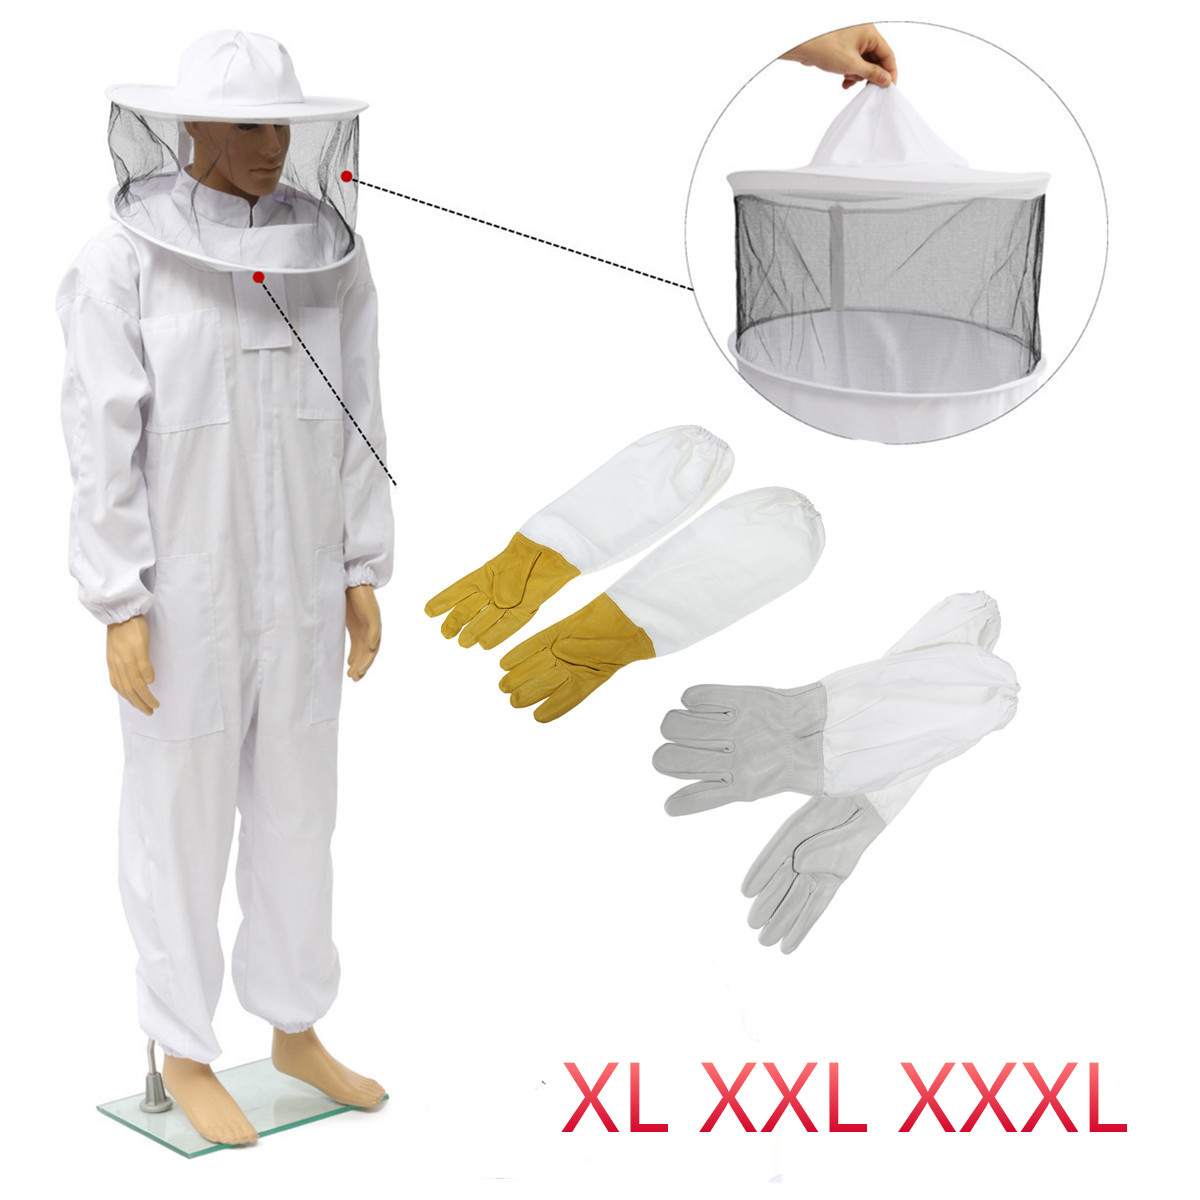 Beekeepers Bee Keeping Cotton Full Protector Suit With Veil Hat Hood Bee Suit XL XXL XXL 19